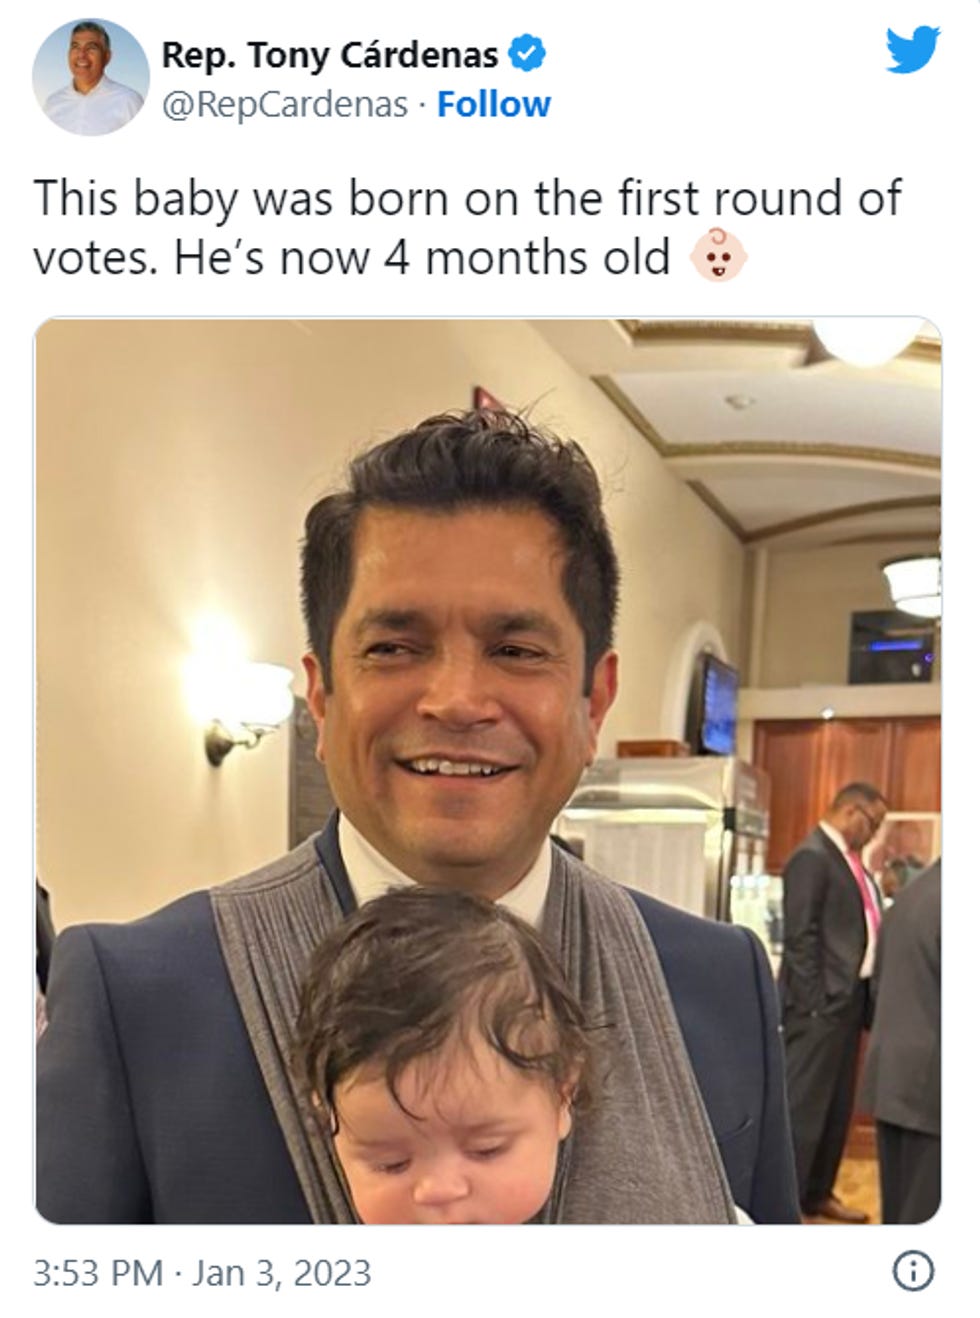 Tony Cardenas tweet: This baby was born on the first round of voting. He's now four months old. 